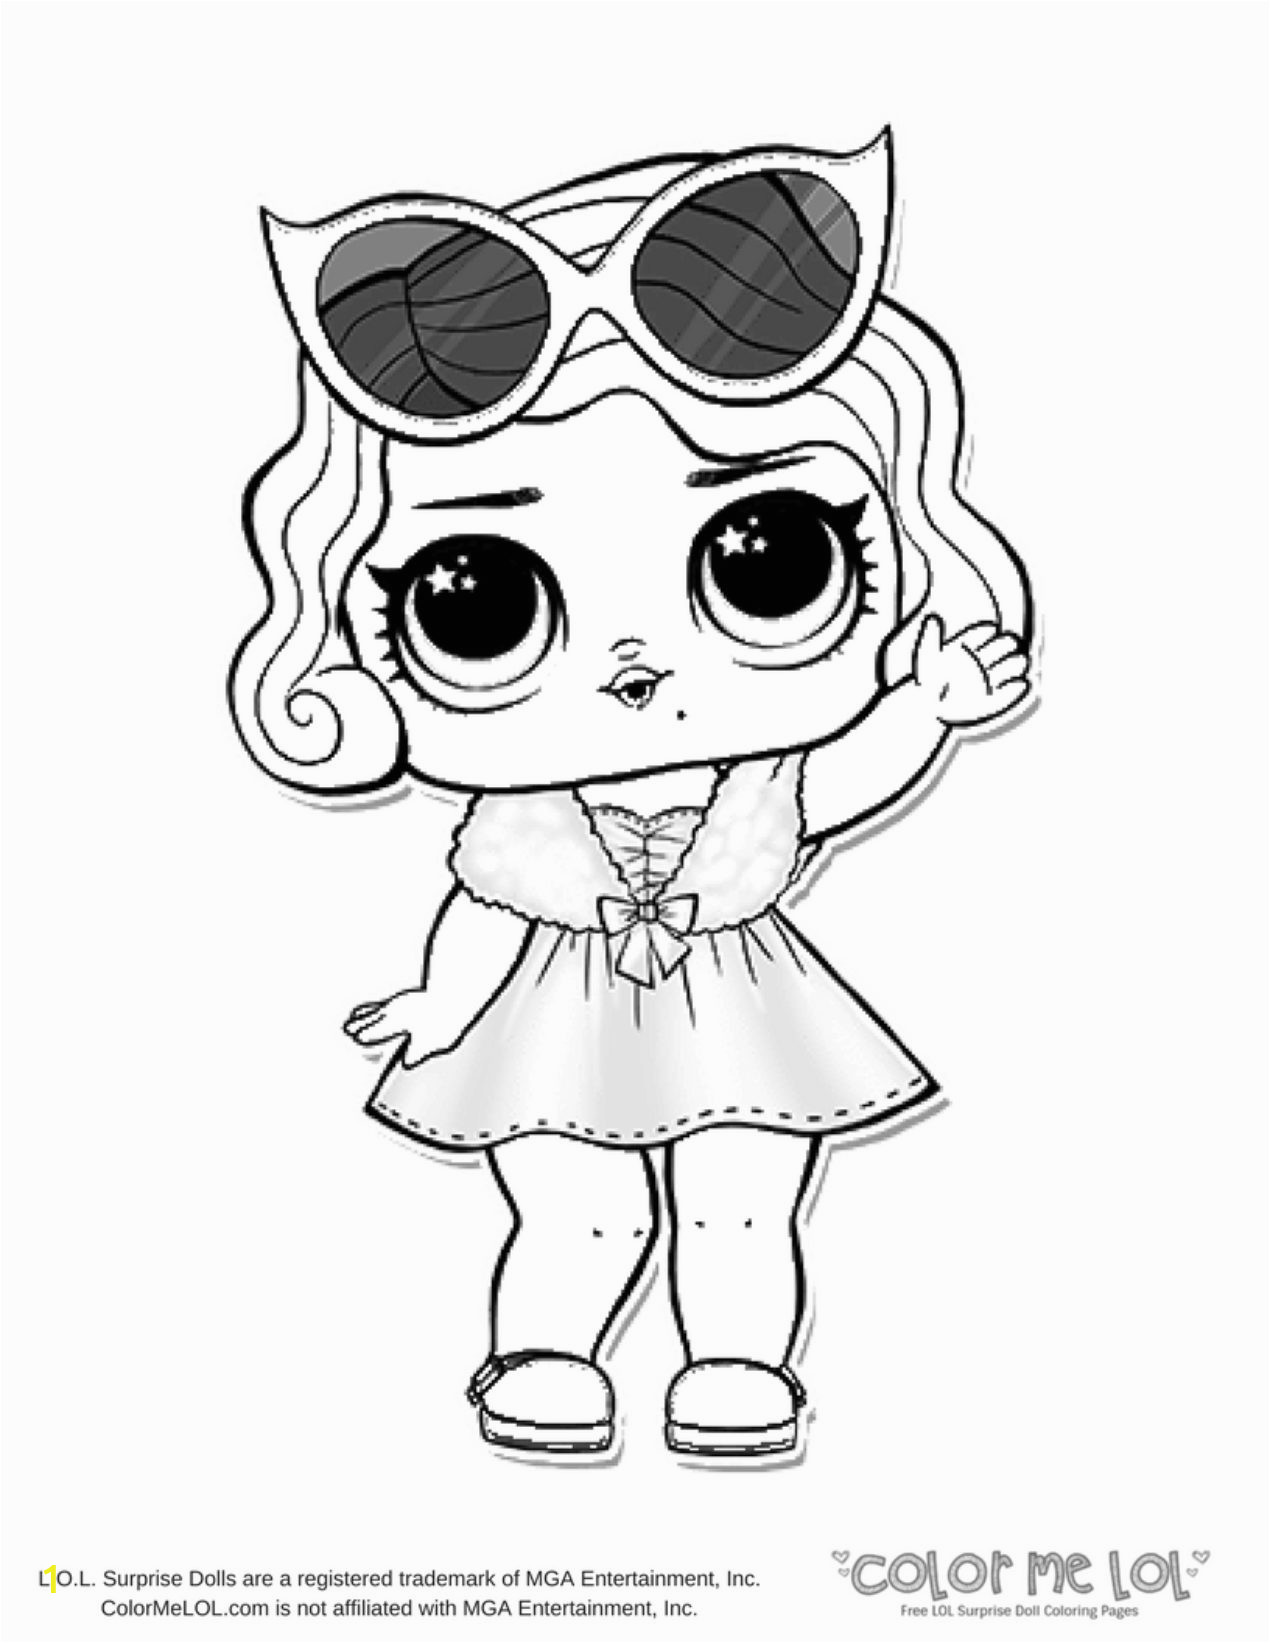 Bon Bon Lol Doll Coloring Page Lol Dolls Coloring Pages at Getdrawings